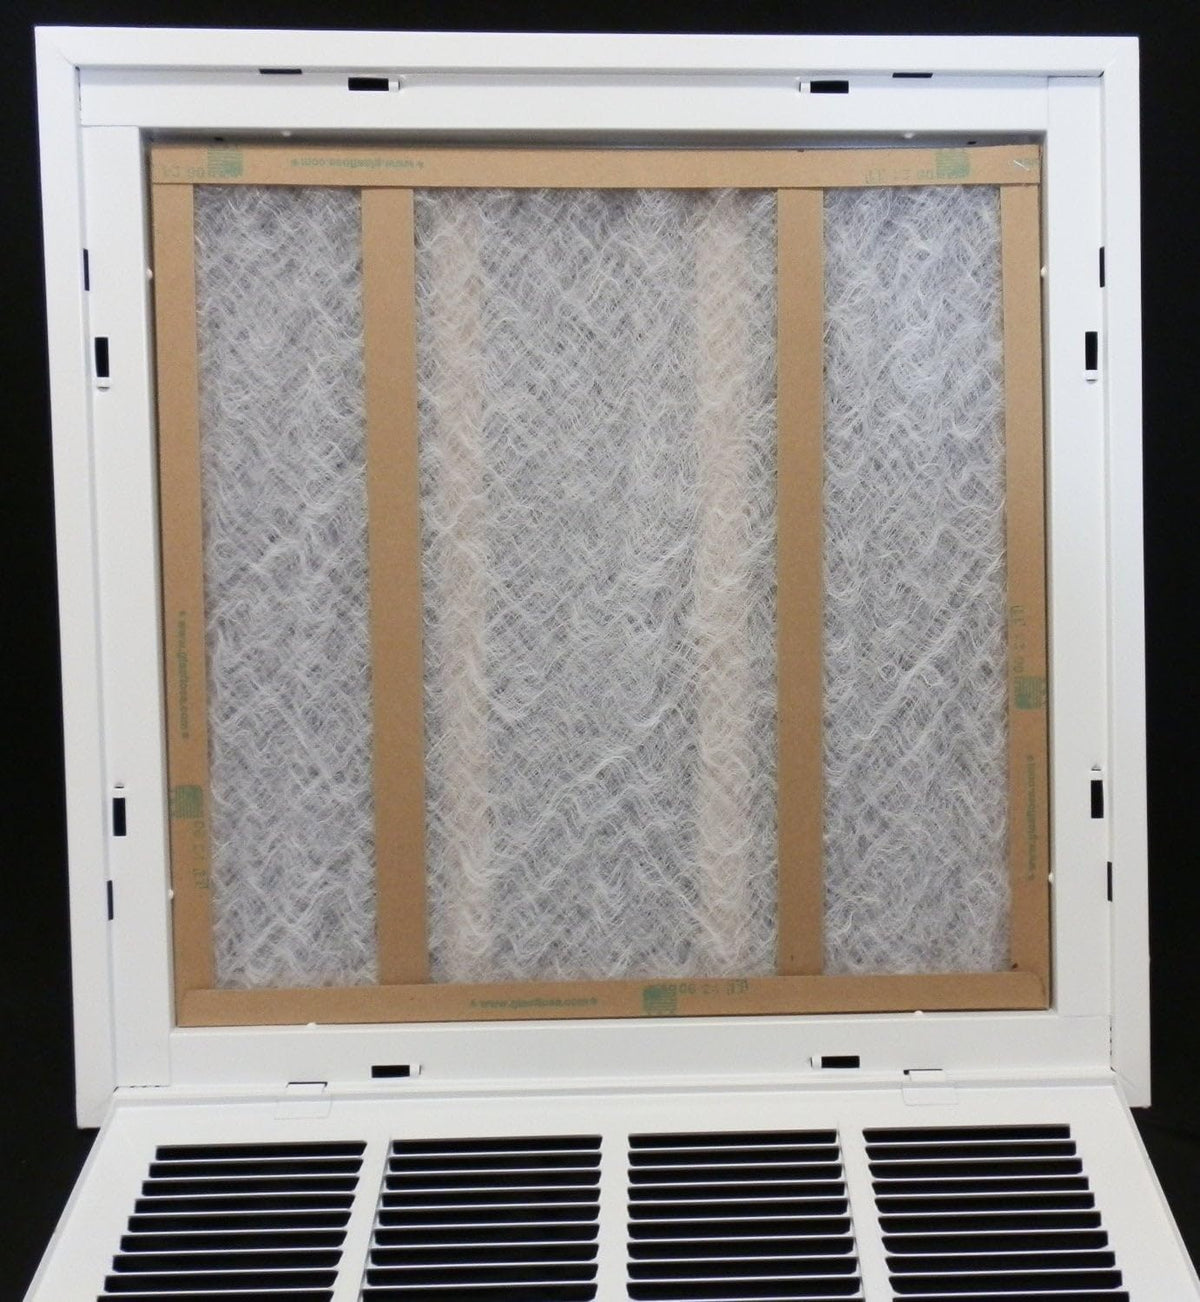 18&quot; X 28&quot; Steel Return Air Filter Grille for 1&quot; Filter - Removable Frame - [Outer Dimensions: 20 5/8&quot; X 30 5/8&quot;]